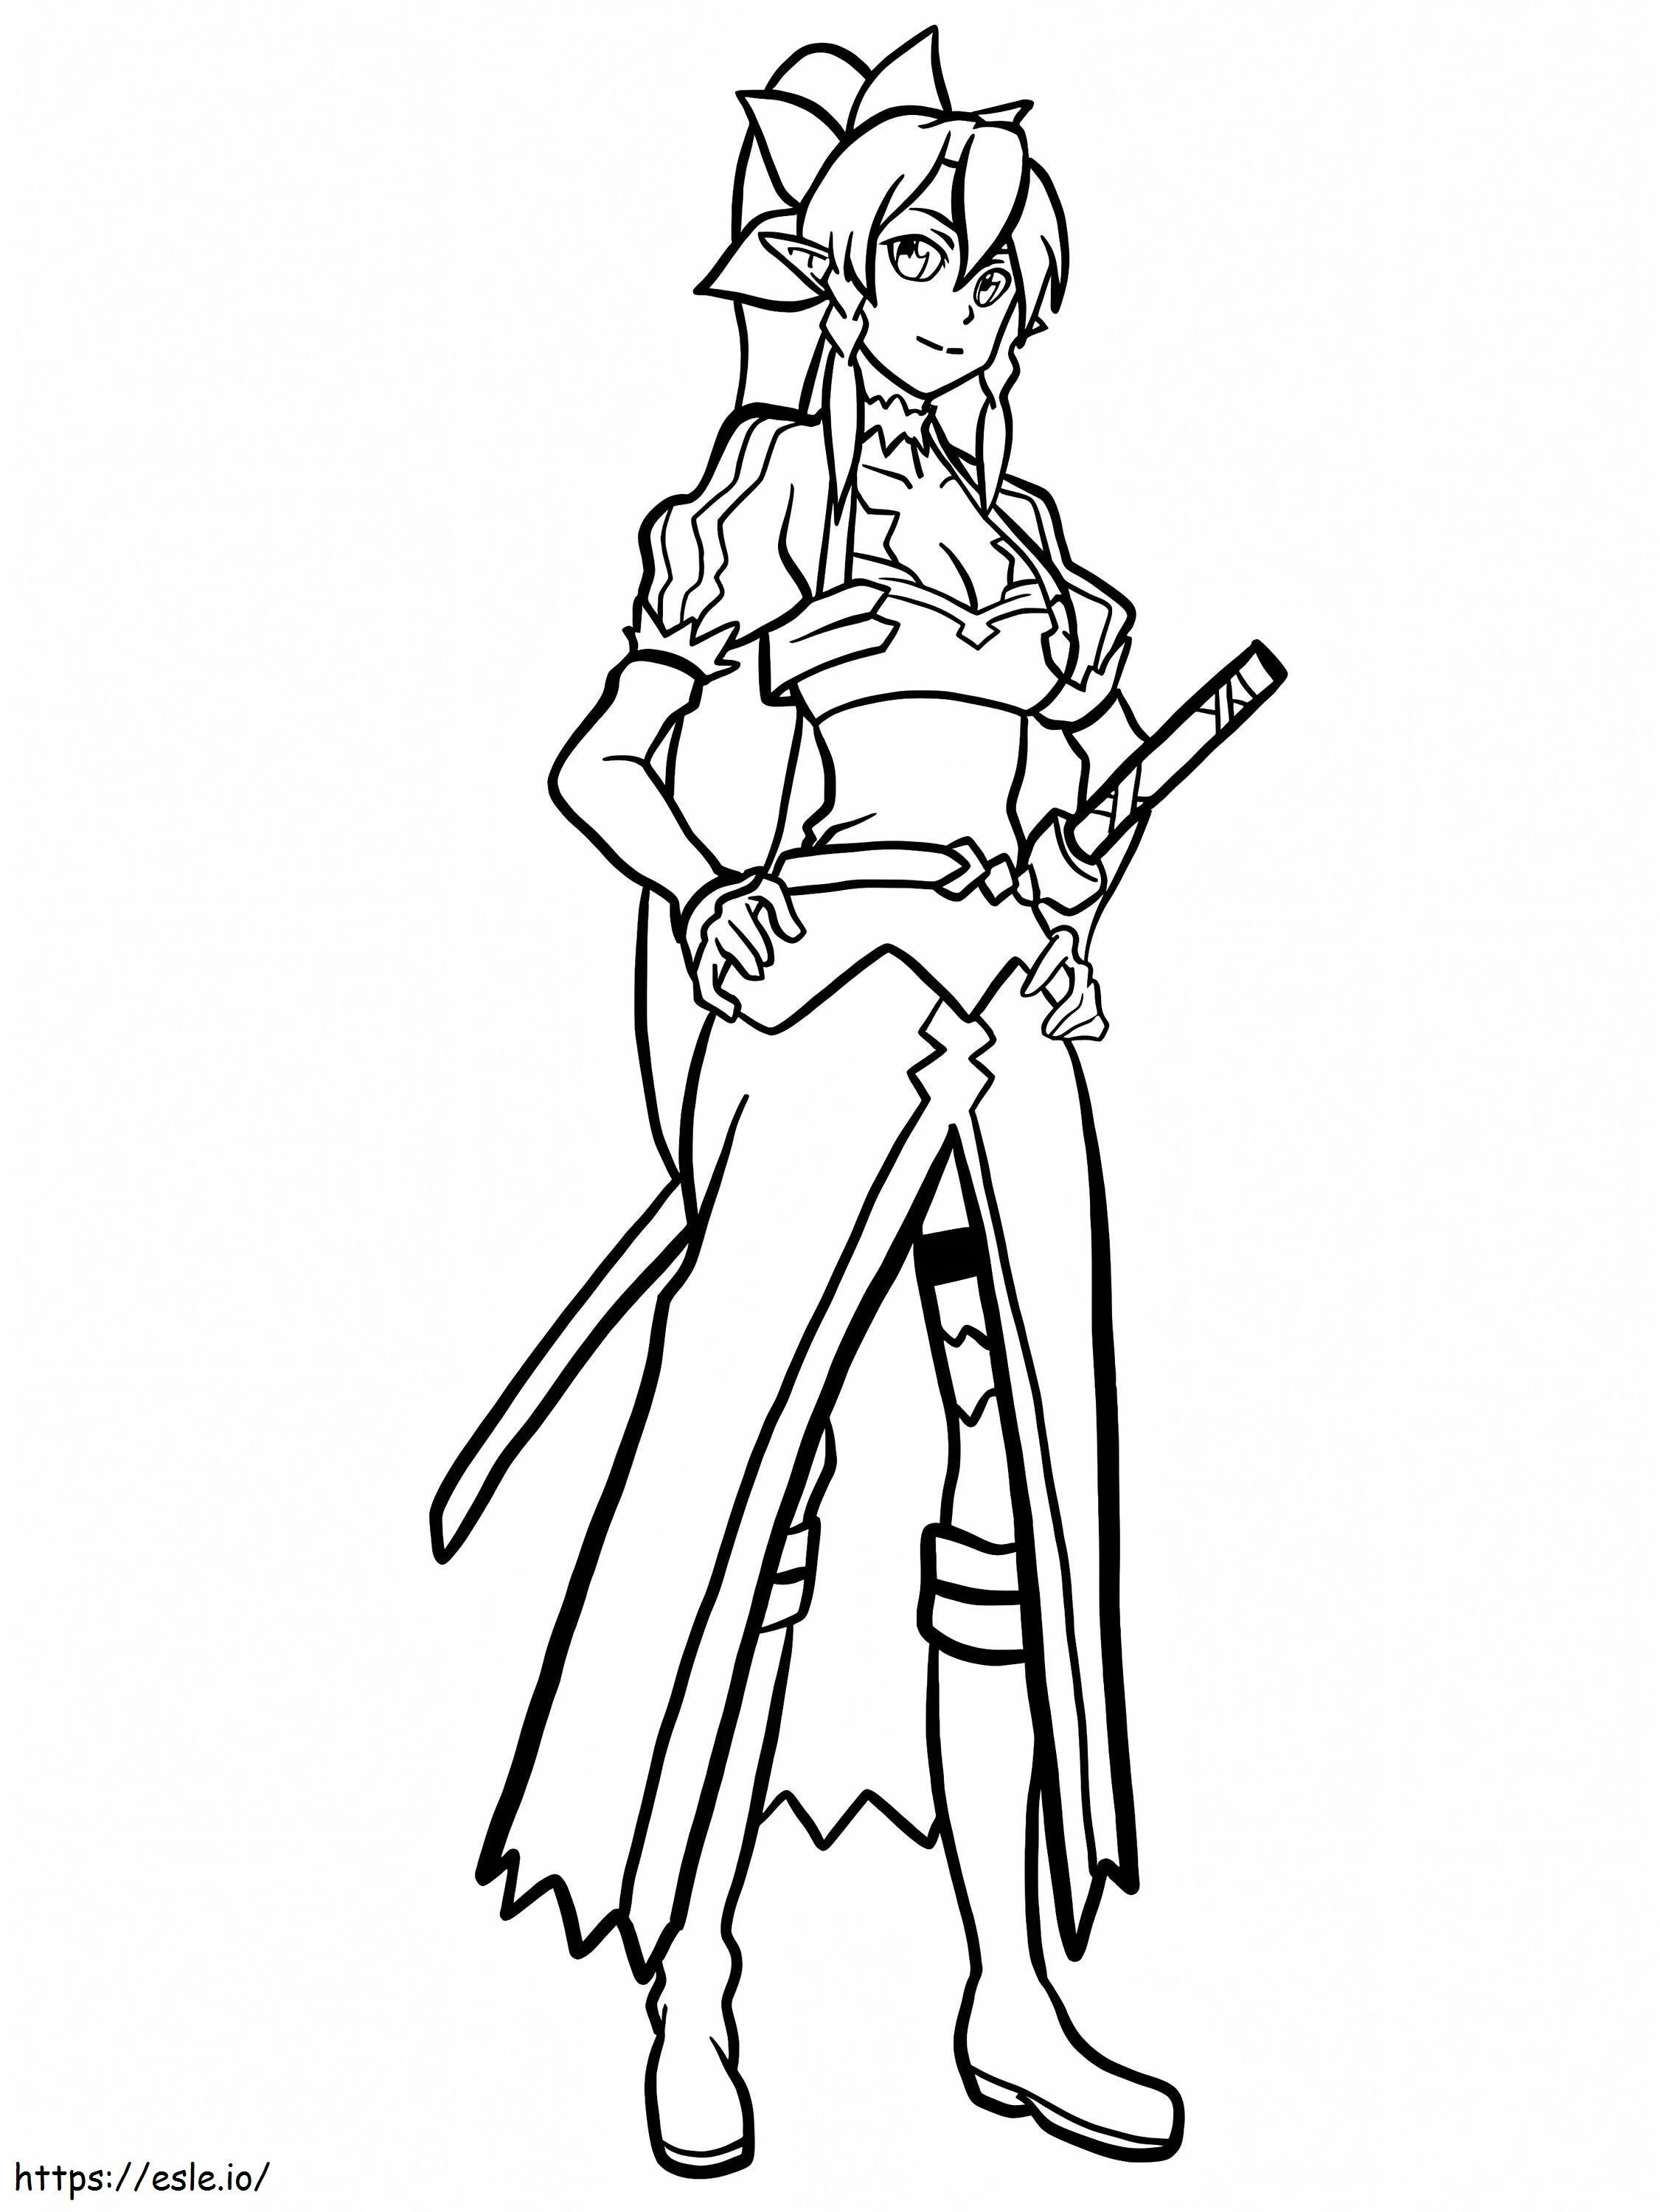 Leafa Sword Art Online coloring page